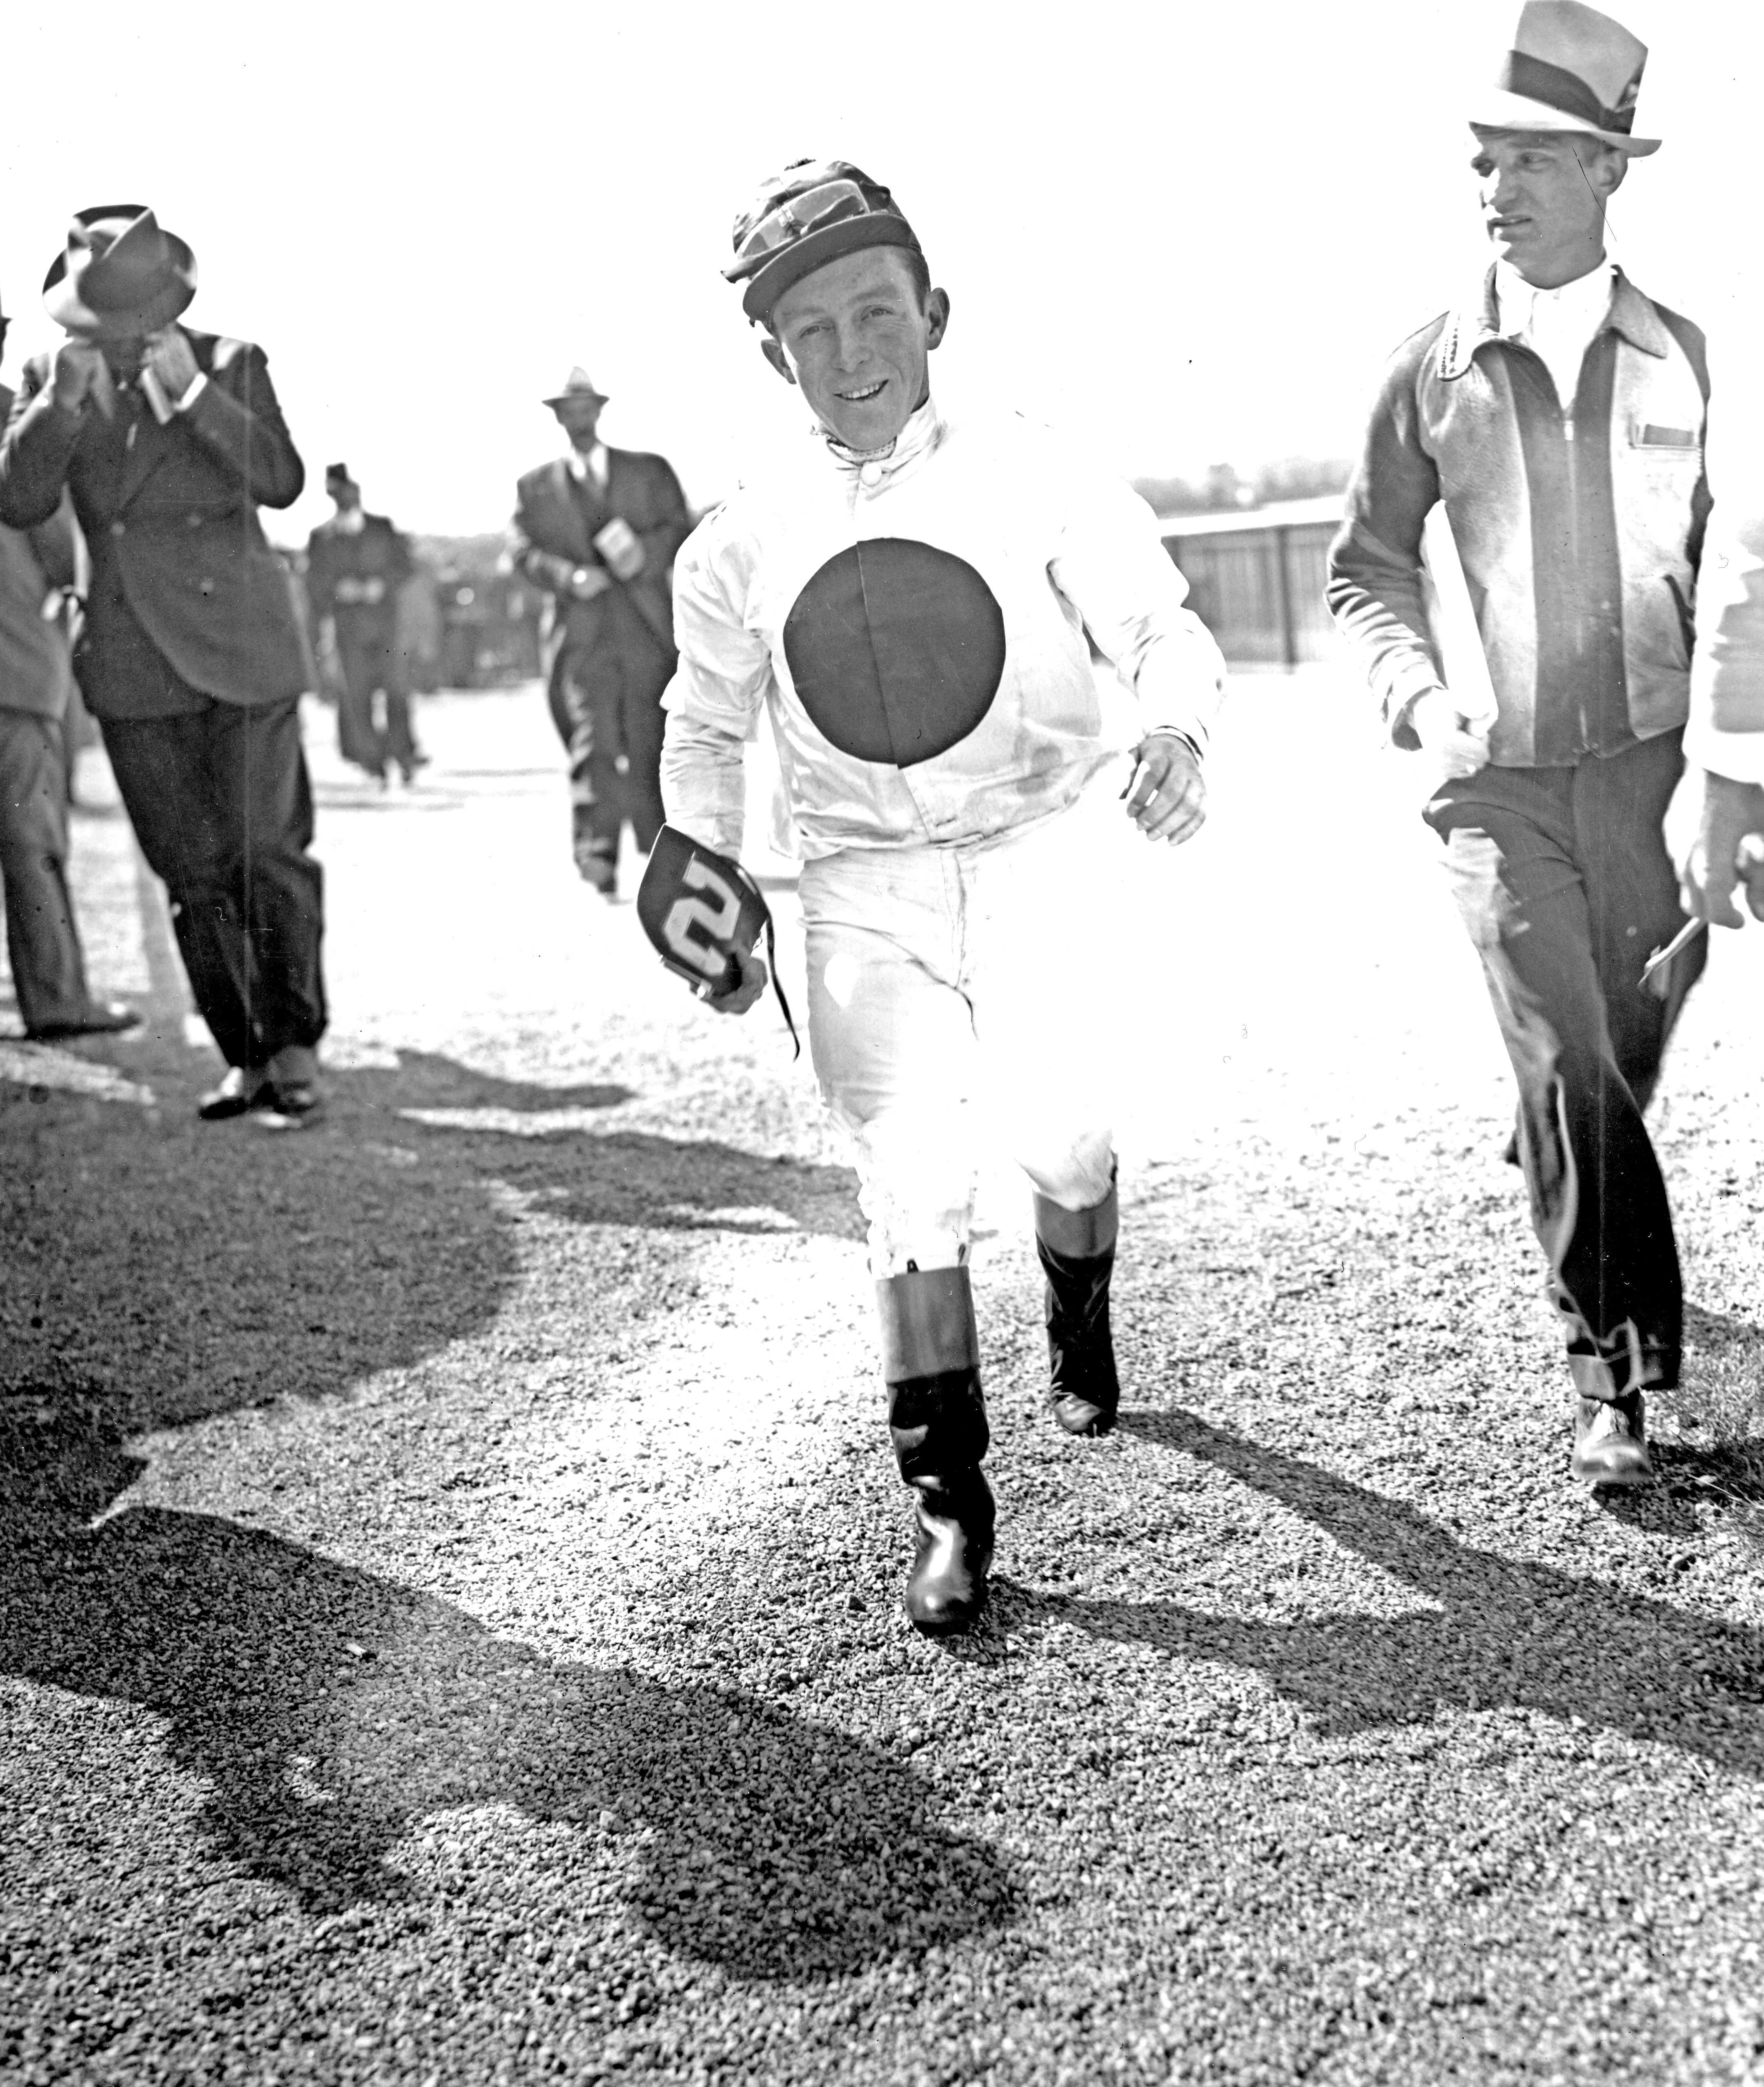 John Adams at Belmont Park, May 1939 (Keeneland Library Morgan Collection/Museum Collection)